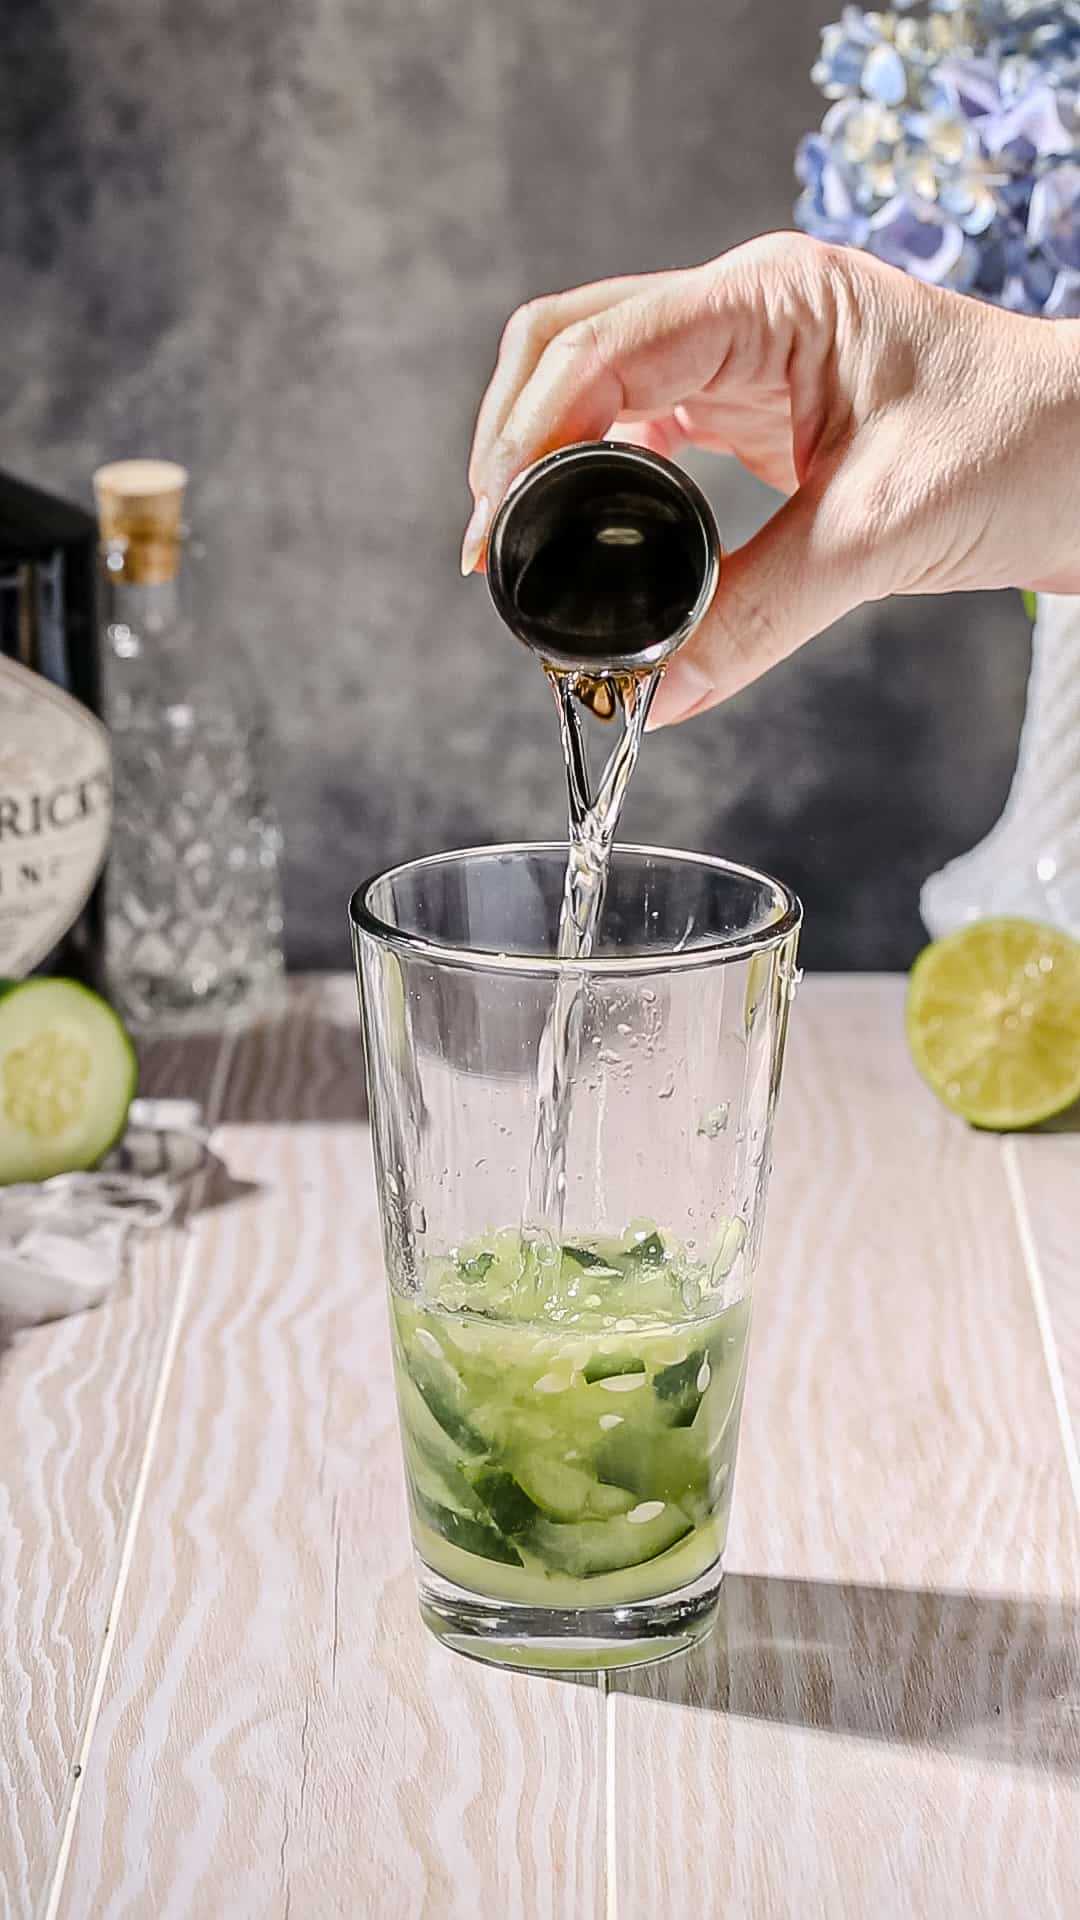 Hand pouring gin from a jigger into a cocktail shaker filled with cucumbers and green liquid.